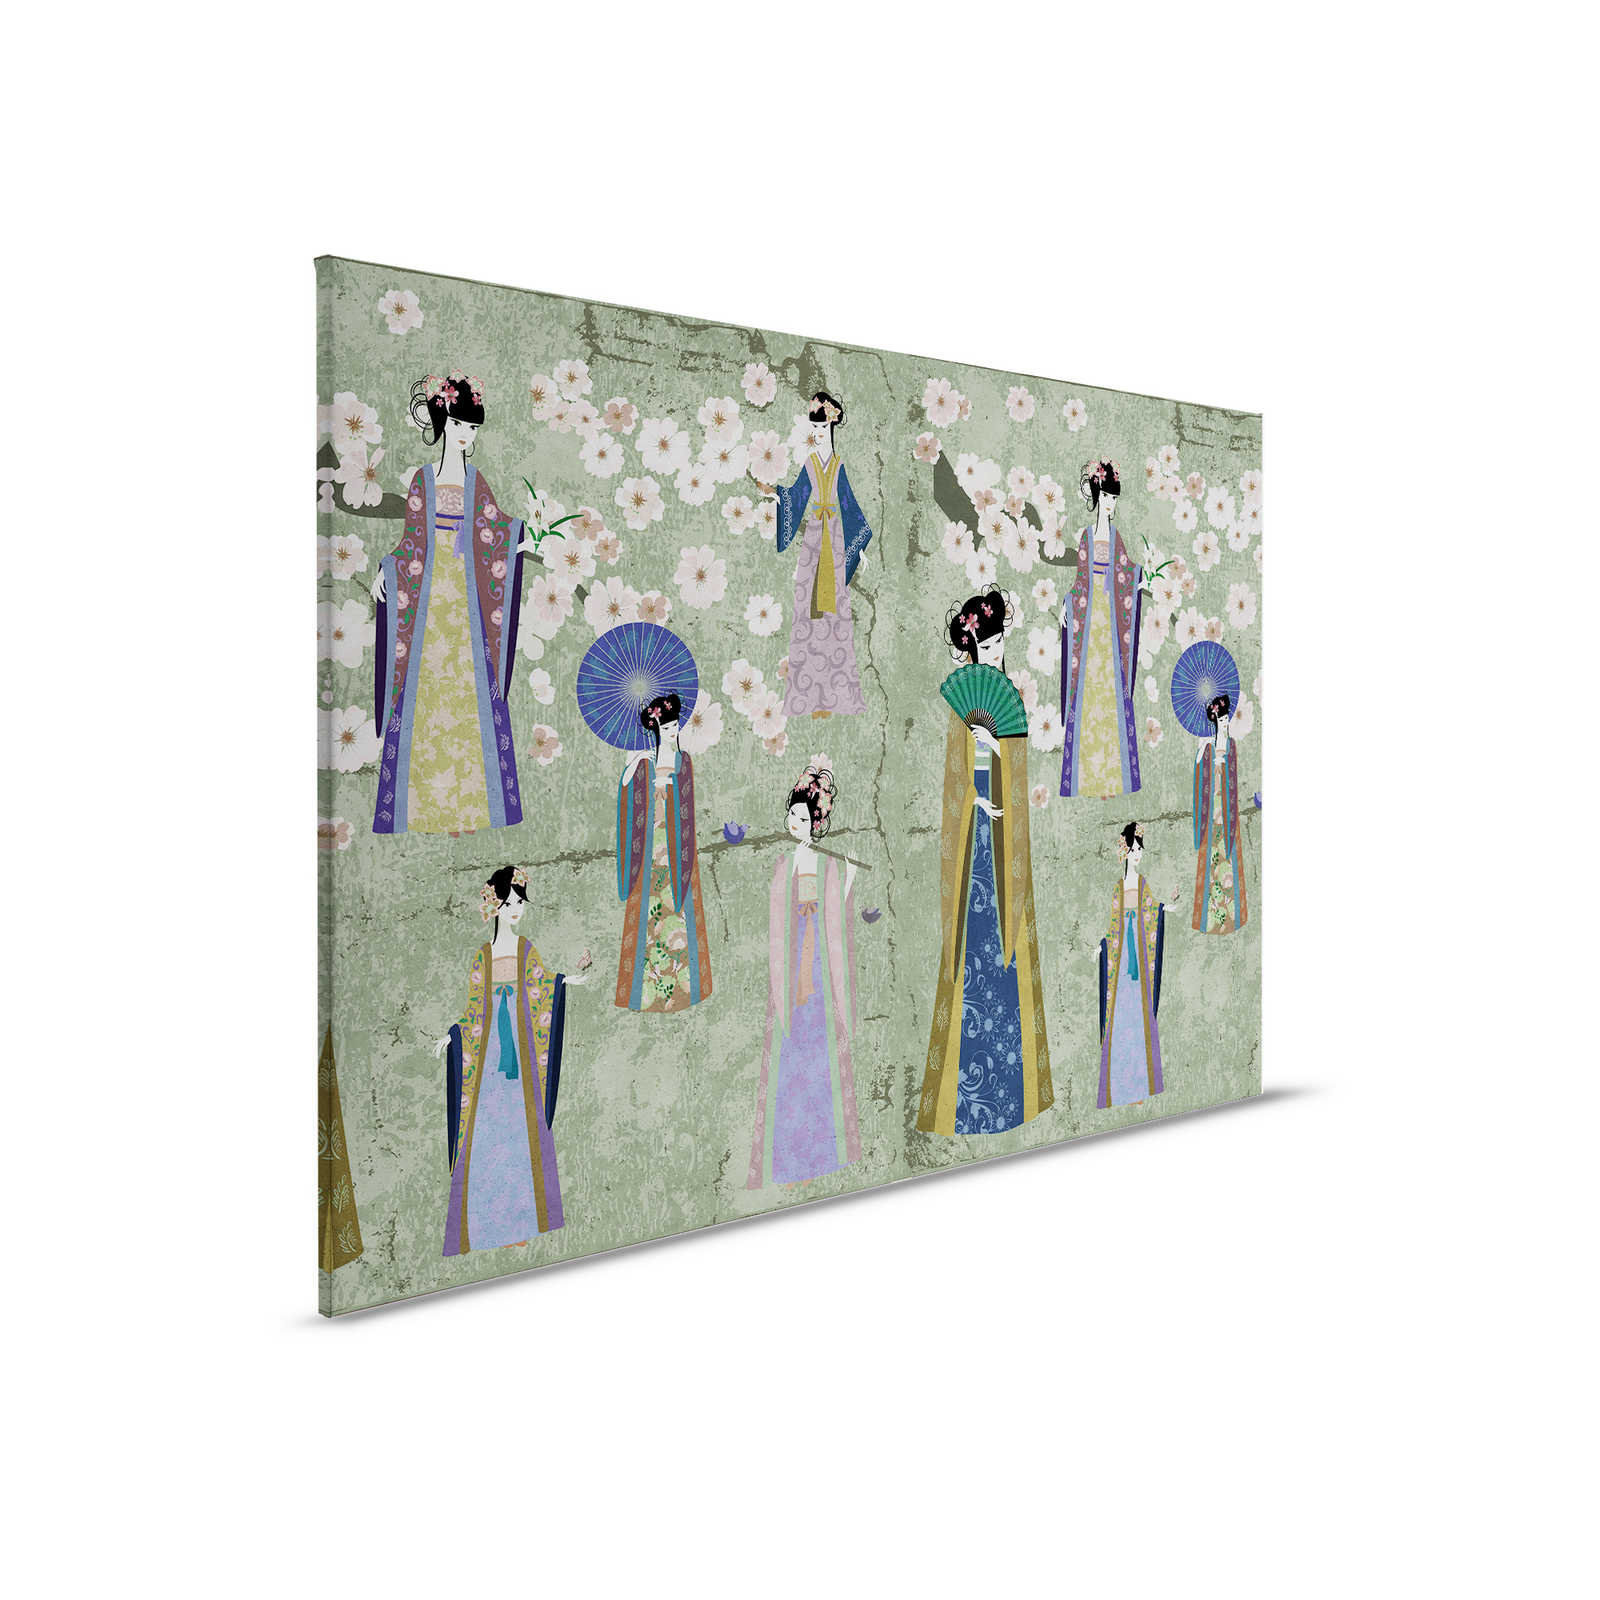         Canvas painting Japan Comic with cherry blossoms | green, blue - 0,90 m x 0,60 m
    